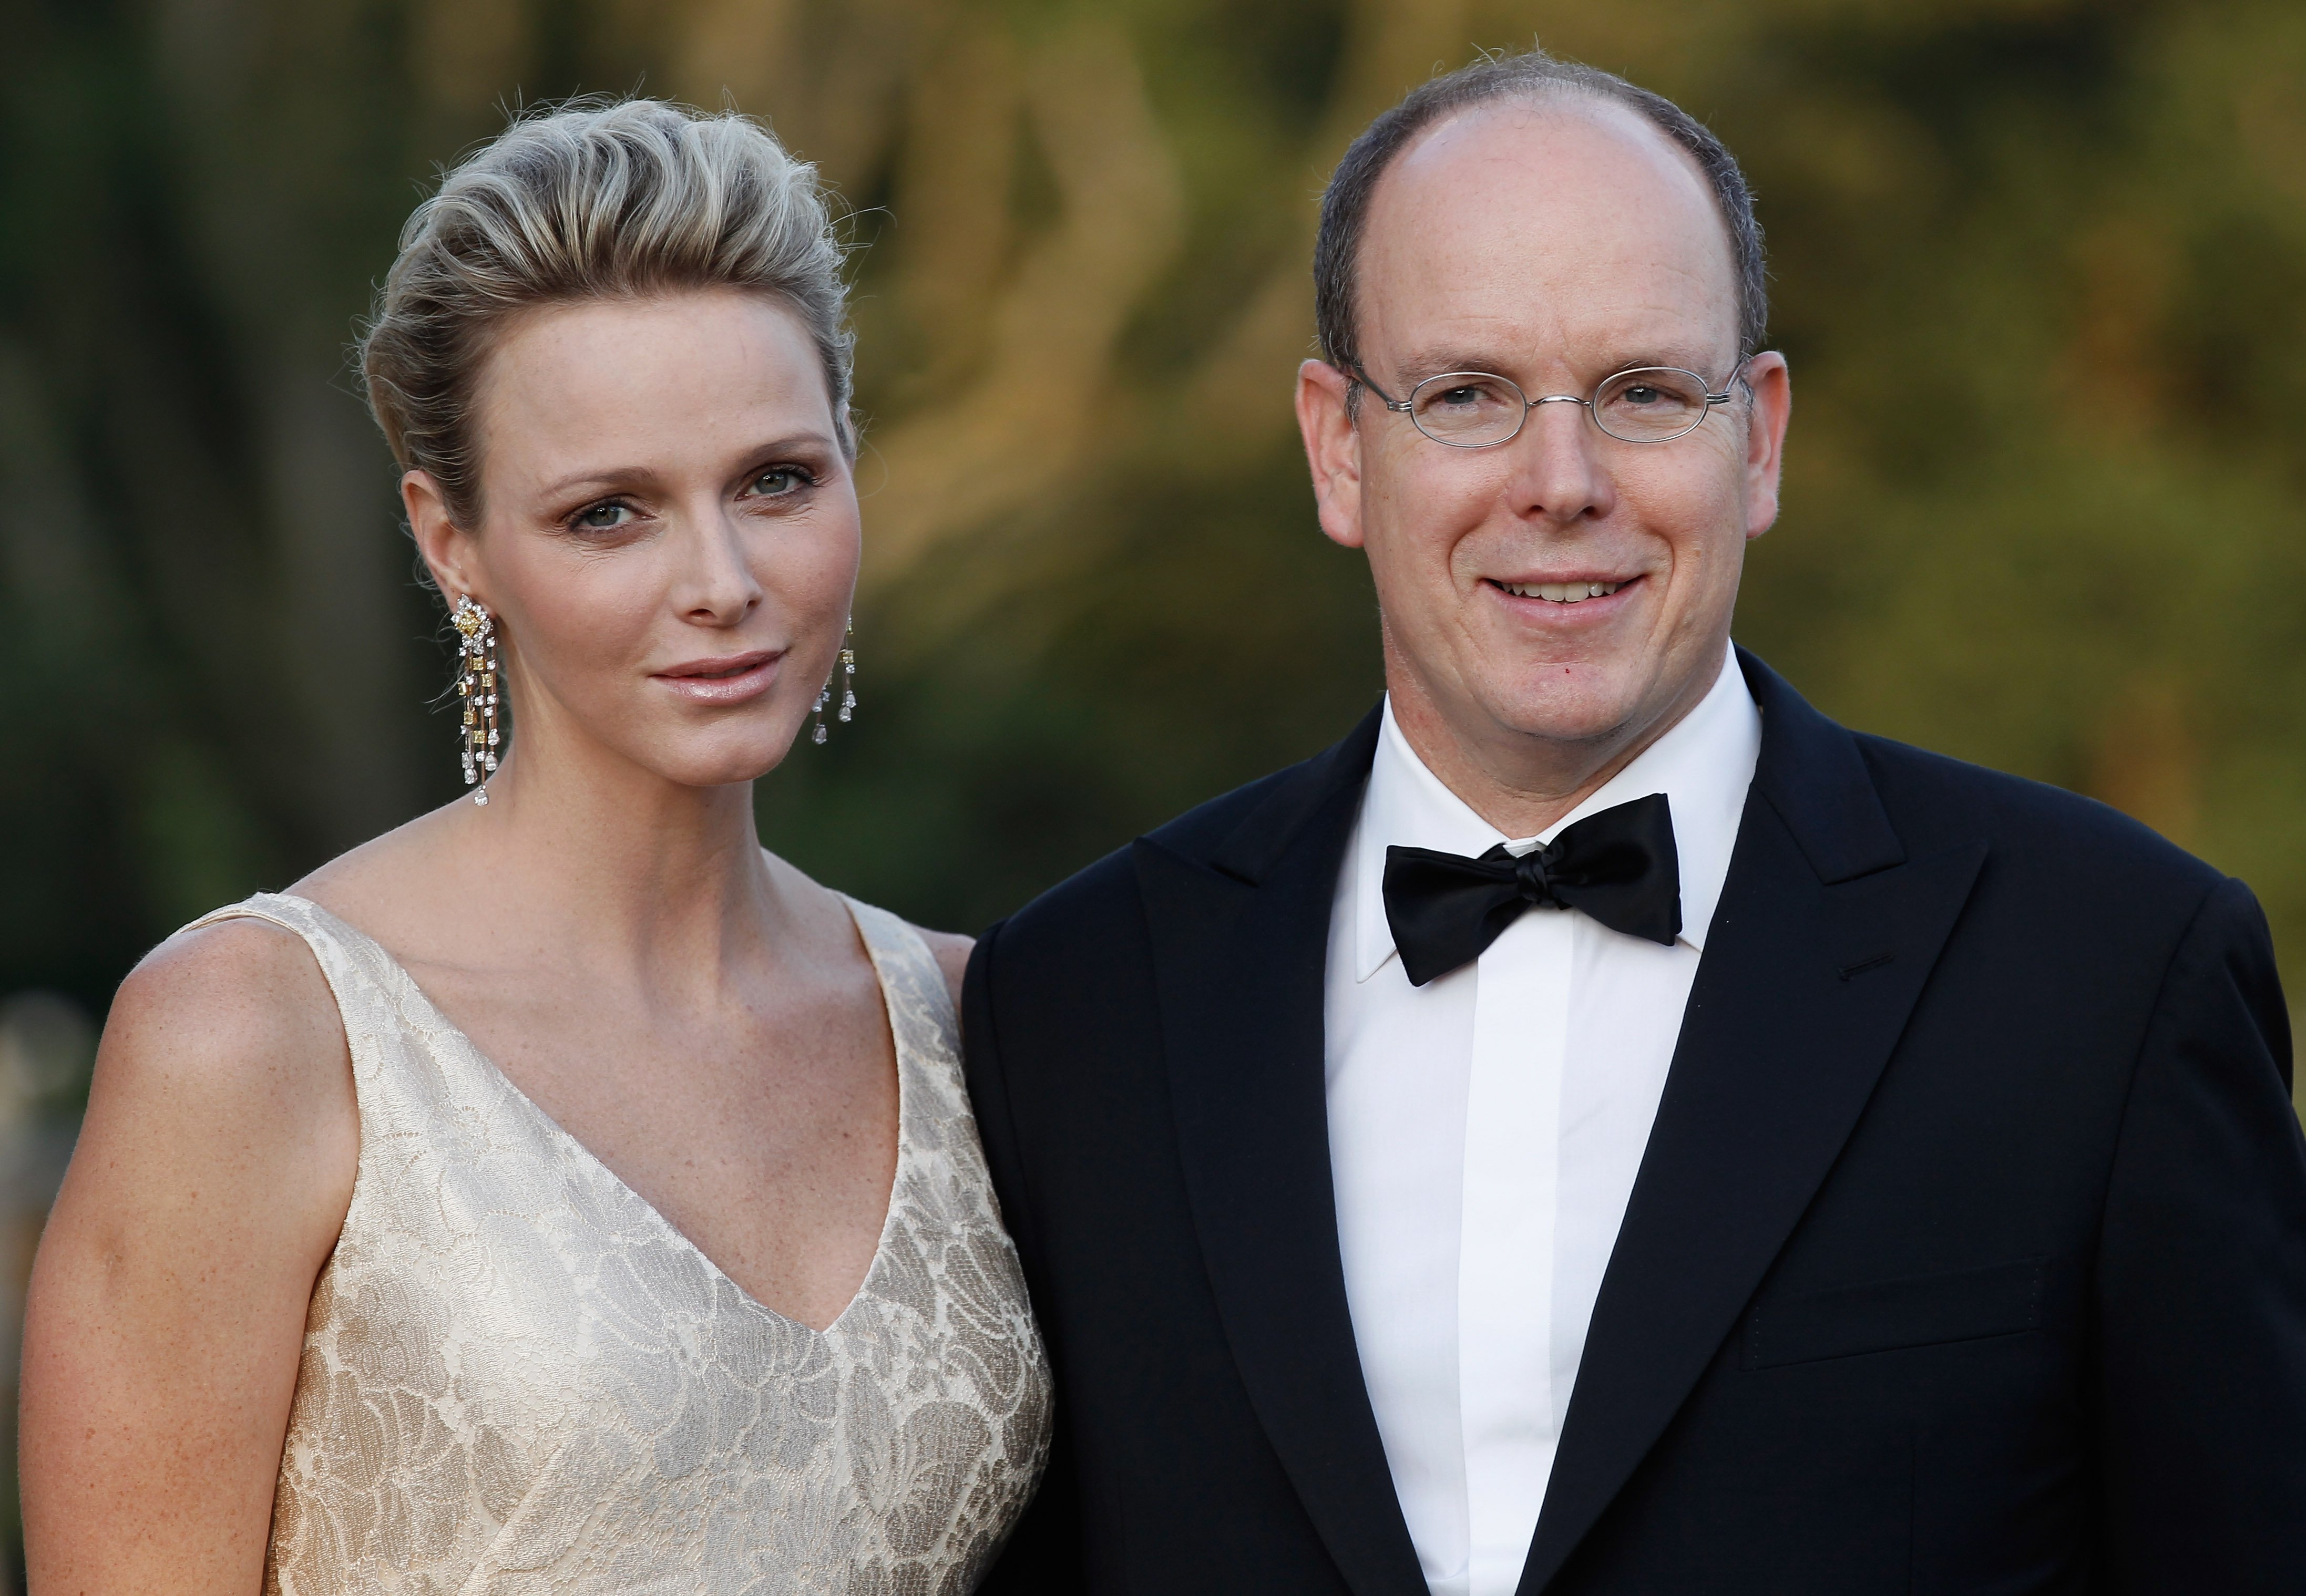 Princess Charlene of Monaco and Prince Albert II at the Yorkshire Variety Club Golden Ball at Harewood House on September 4, 2011 in Leeds, England. | Source: Getty Images